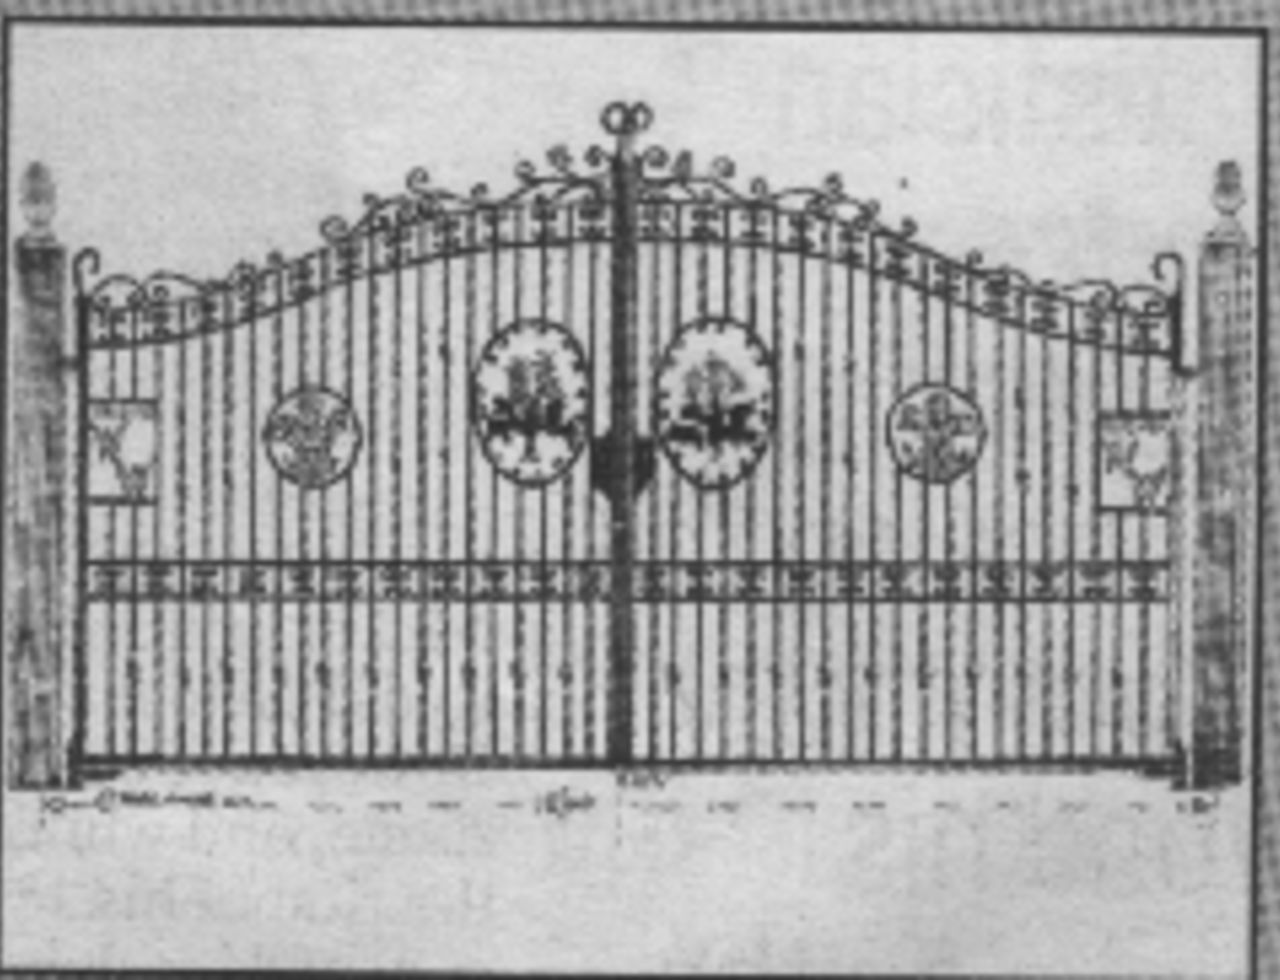 An artist's impression of the Wilf Wooller Memorial Gates